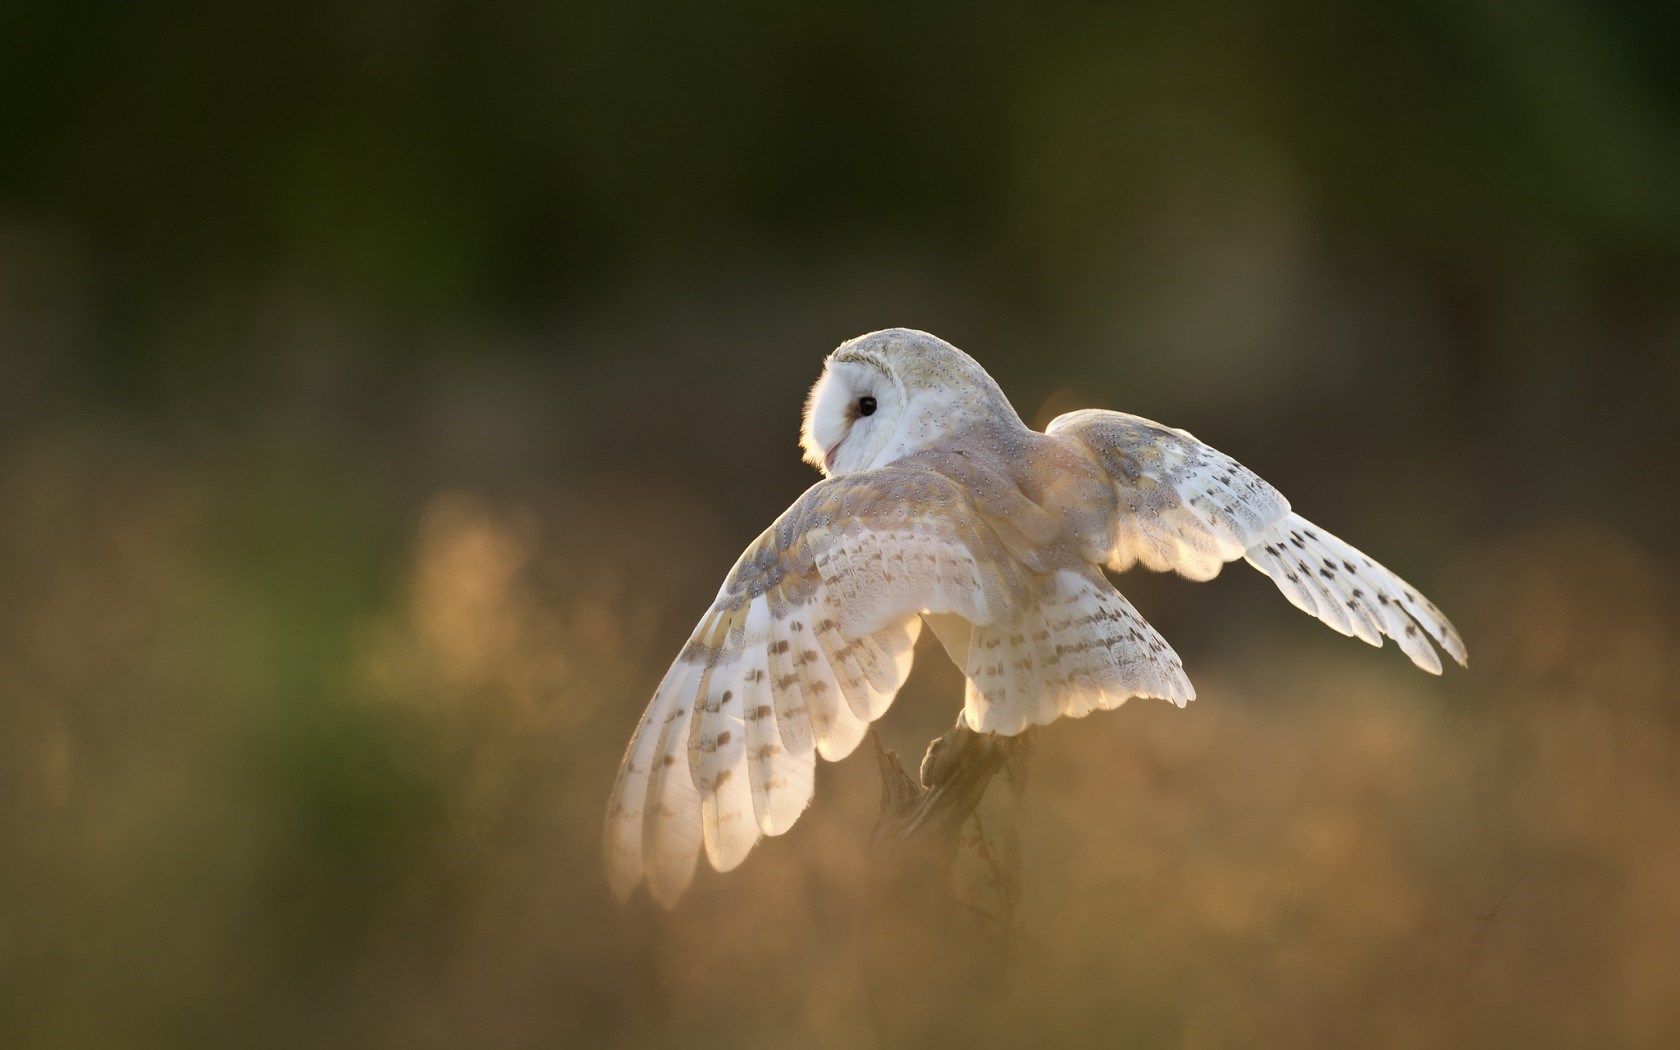 owl flying images